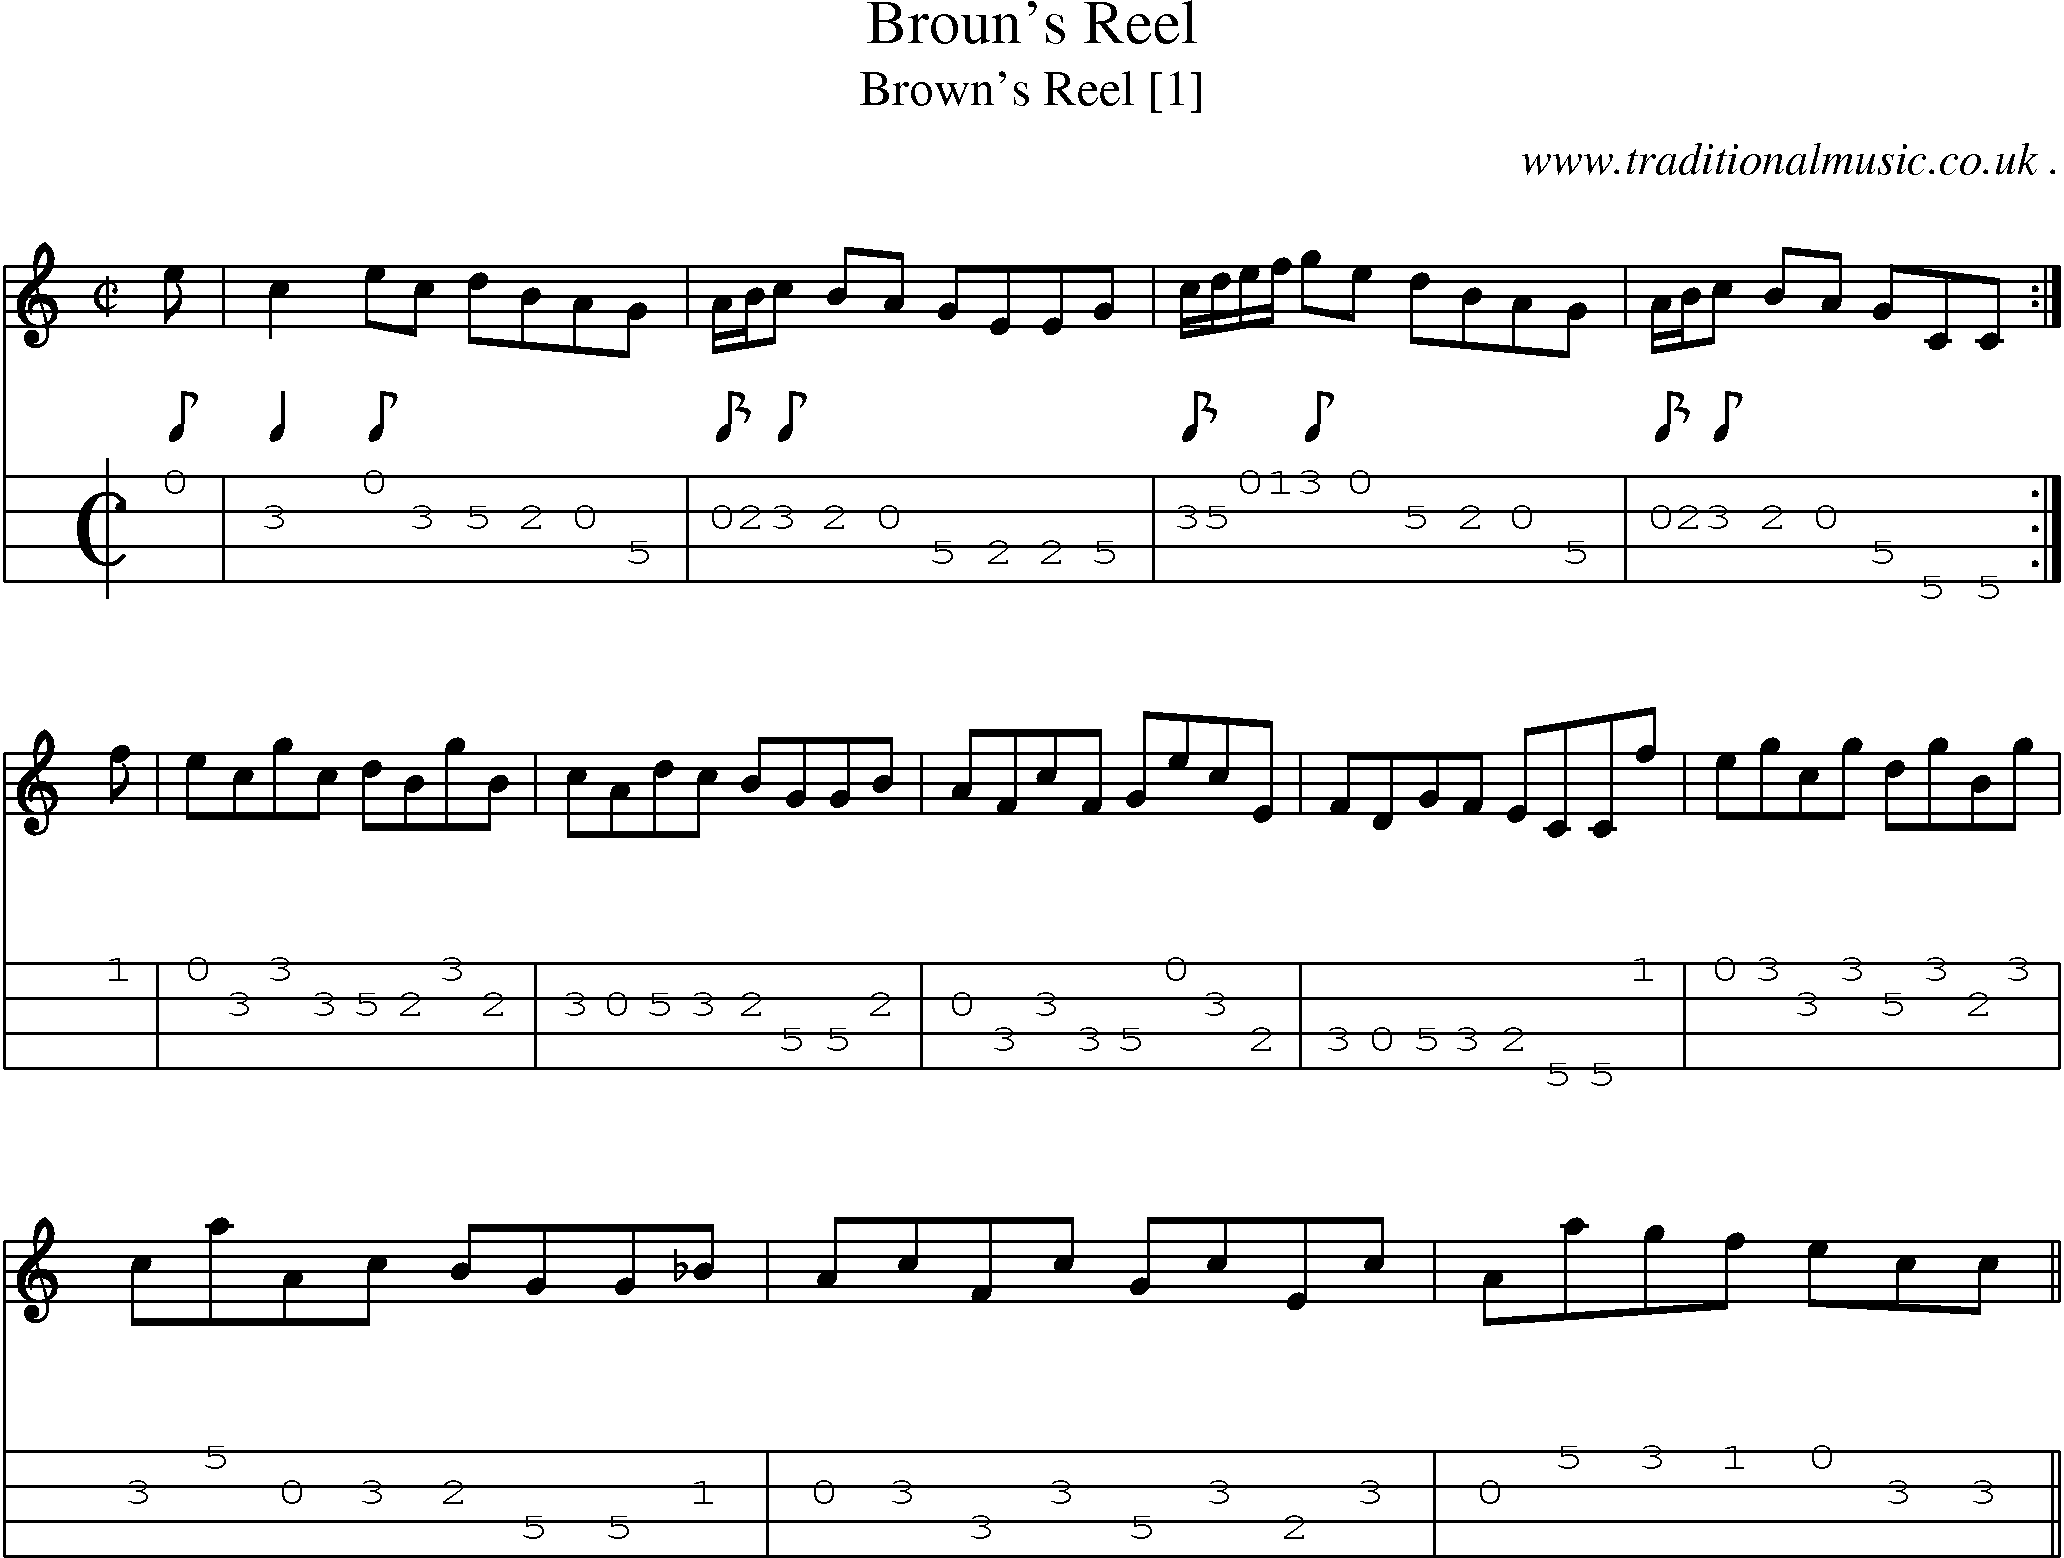 Sheet-music  score, Chords and Mandolin Tabs for Brouns Reel